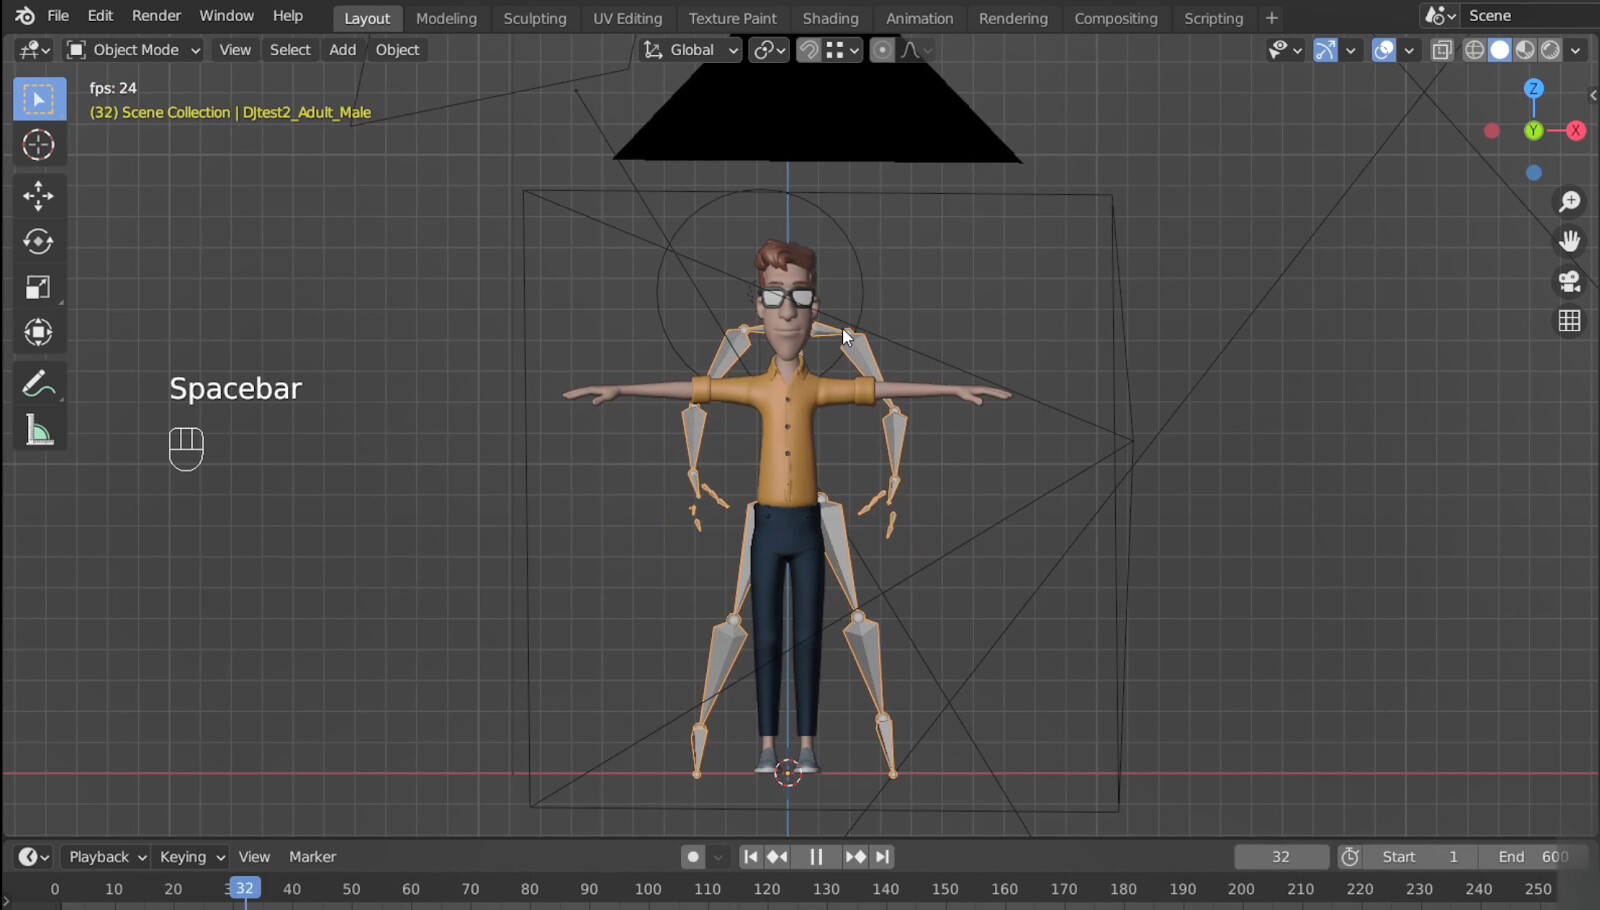 ArtStation - Automatic motion capture with Deepmotion and Blender